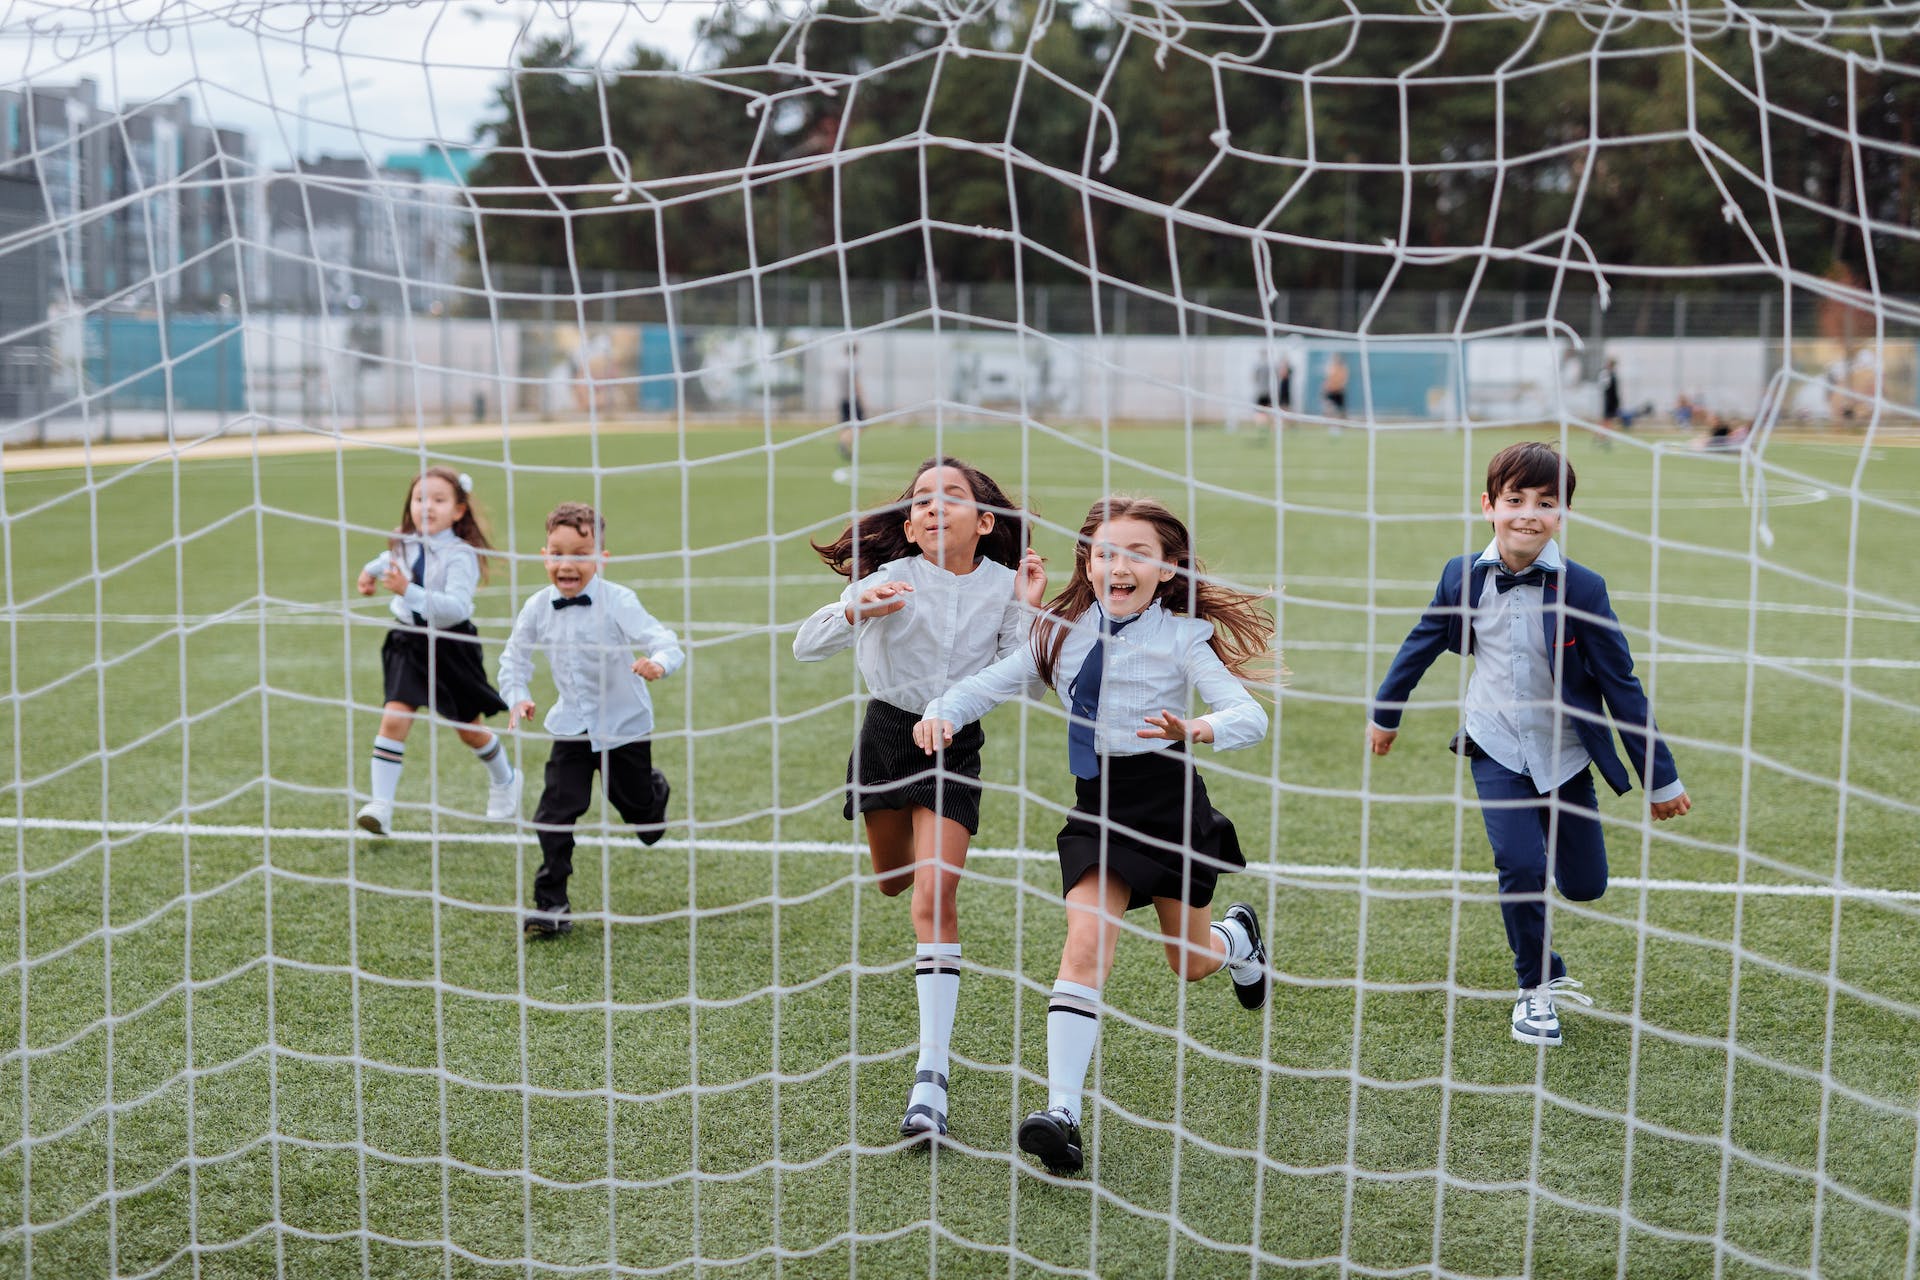 A group of school children running towards a soccer goal, long-term goals can help to motivate and encourage students